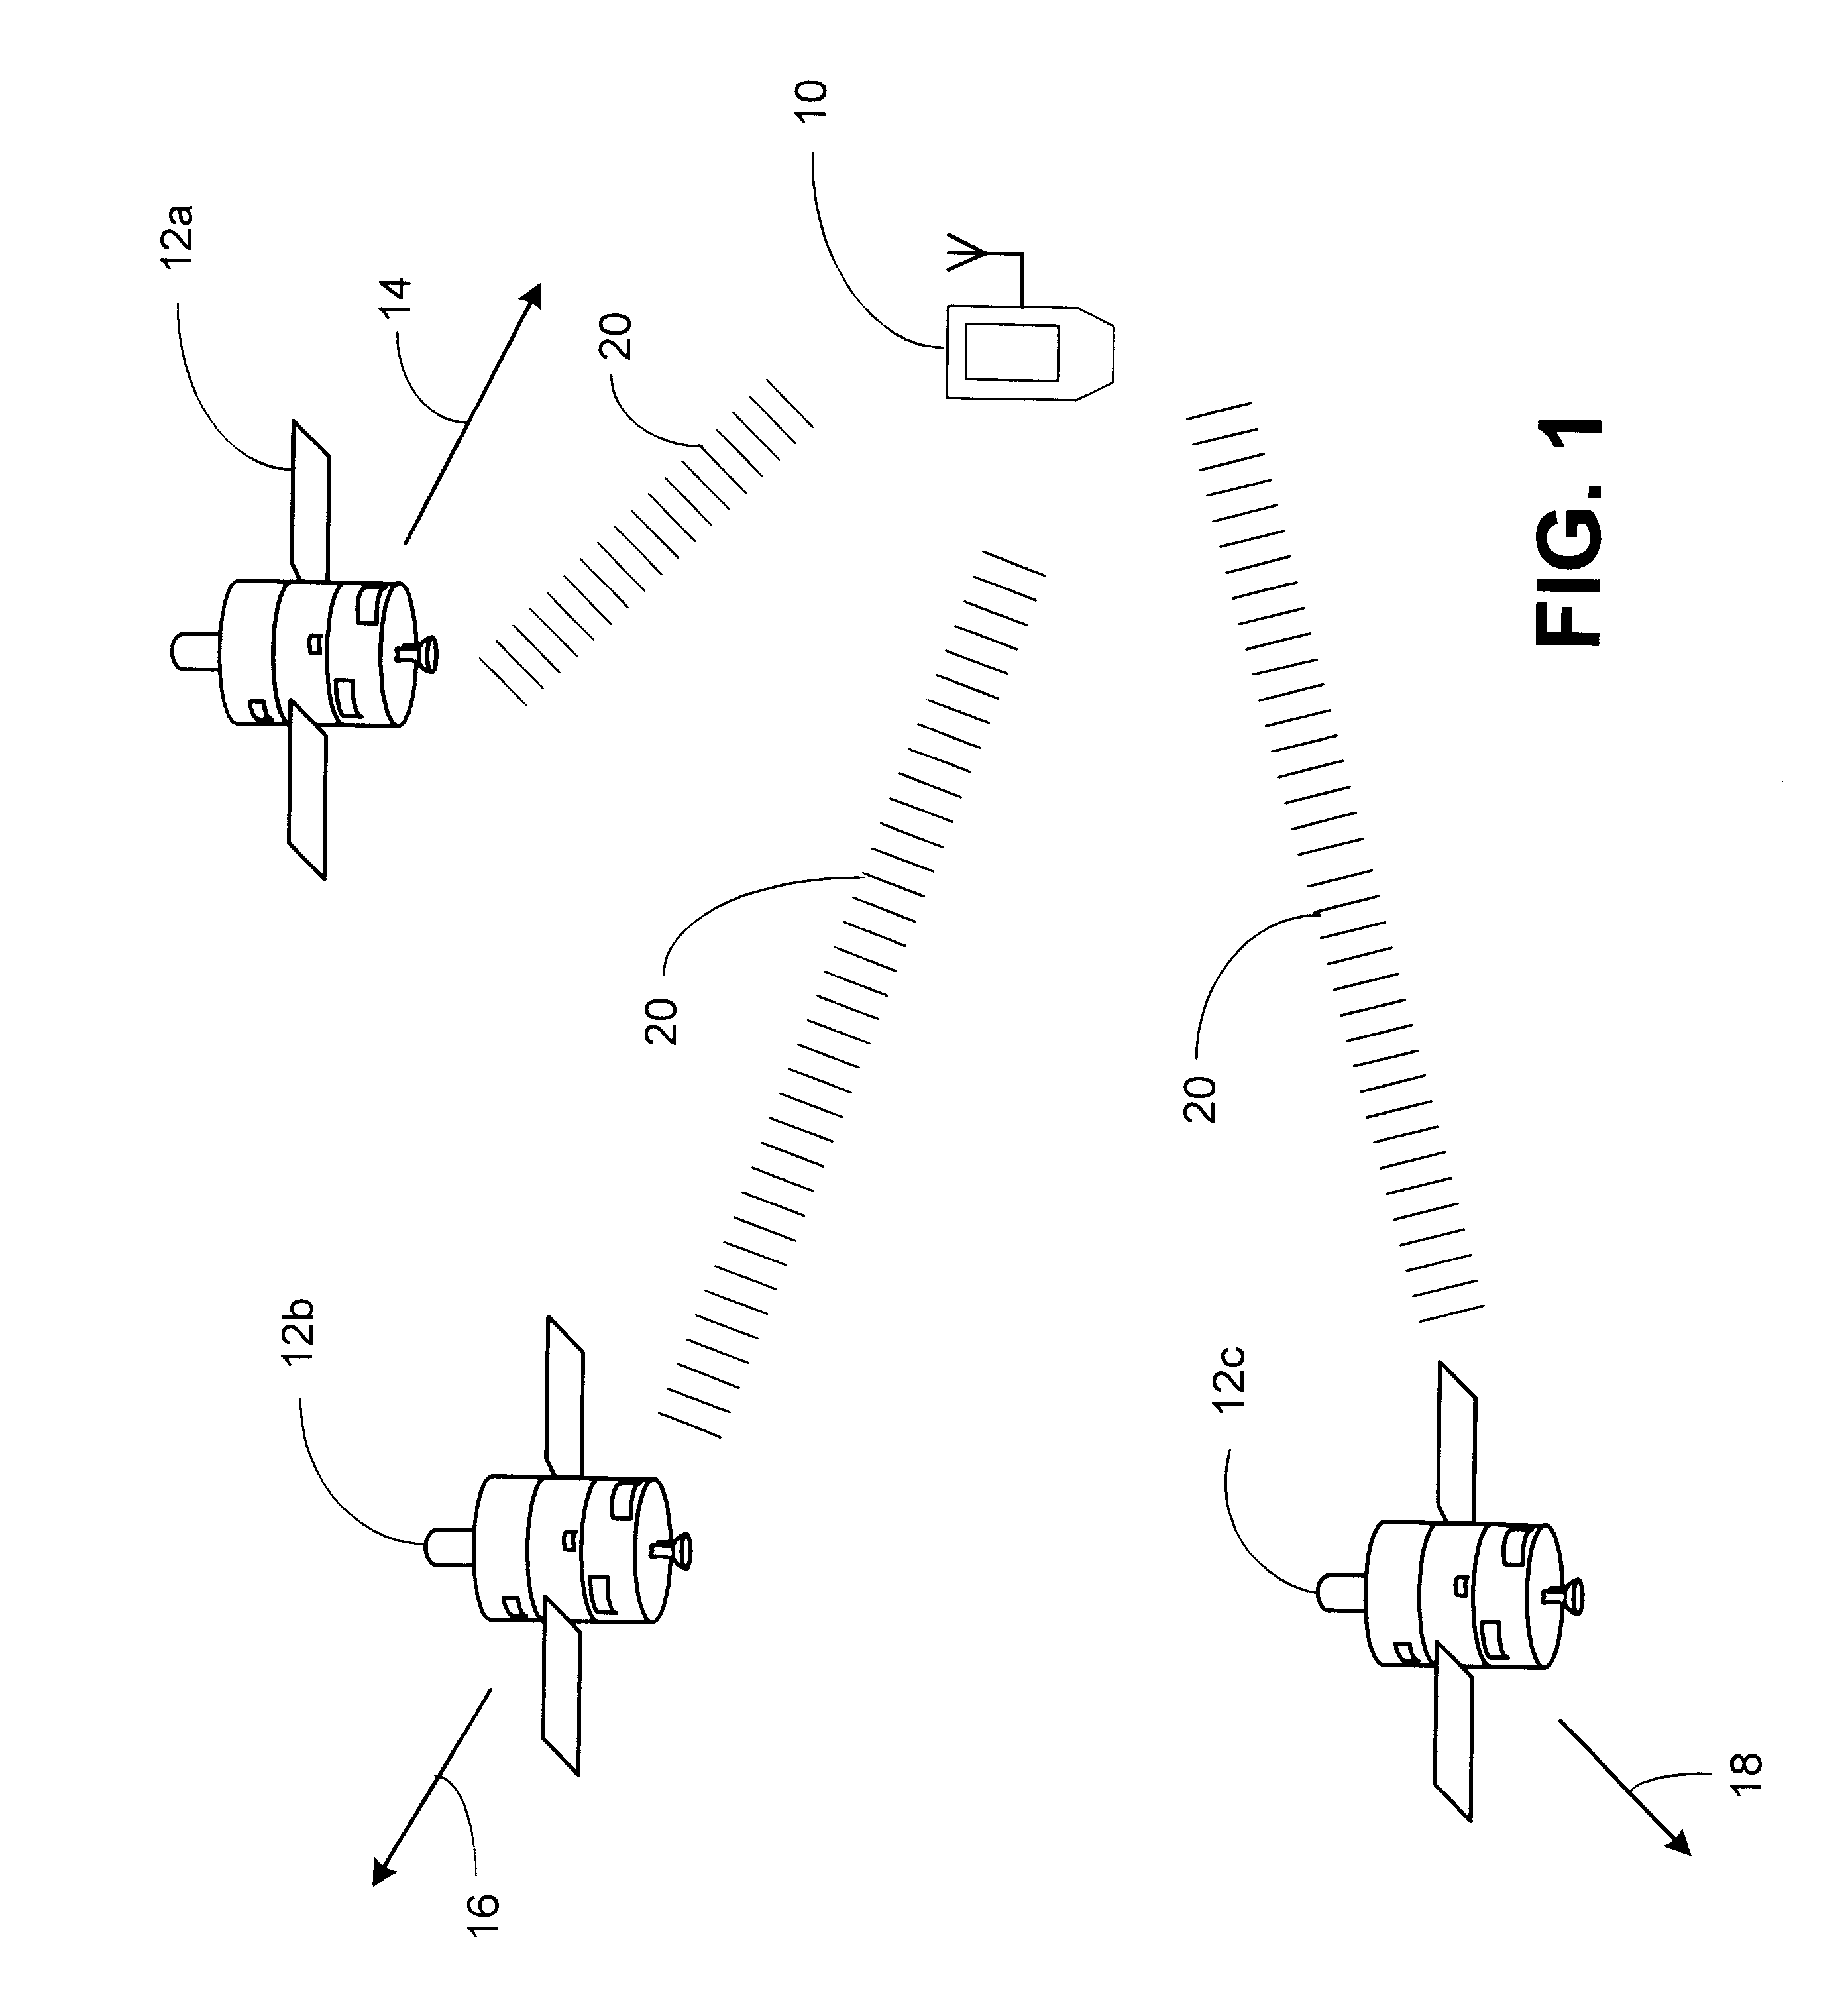 Signal detector employing correlation analysis of non-uniform and disjoint sample segments